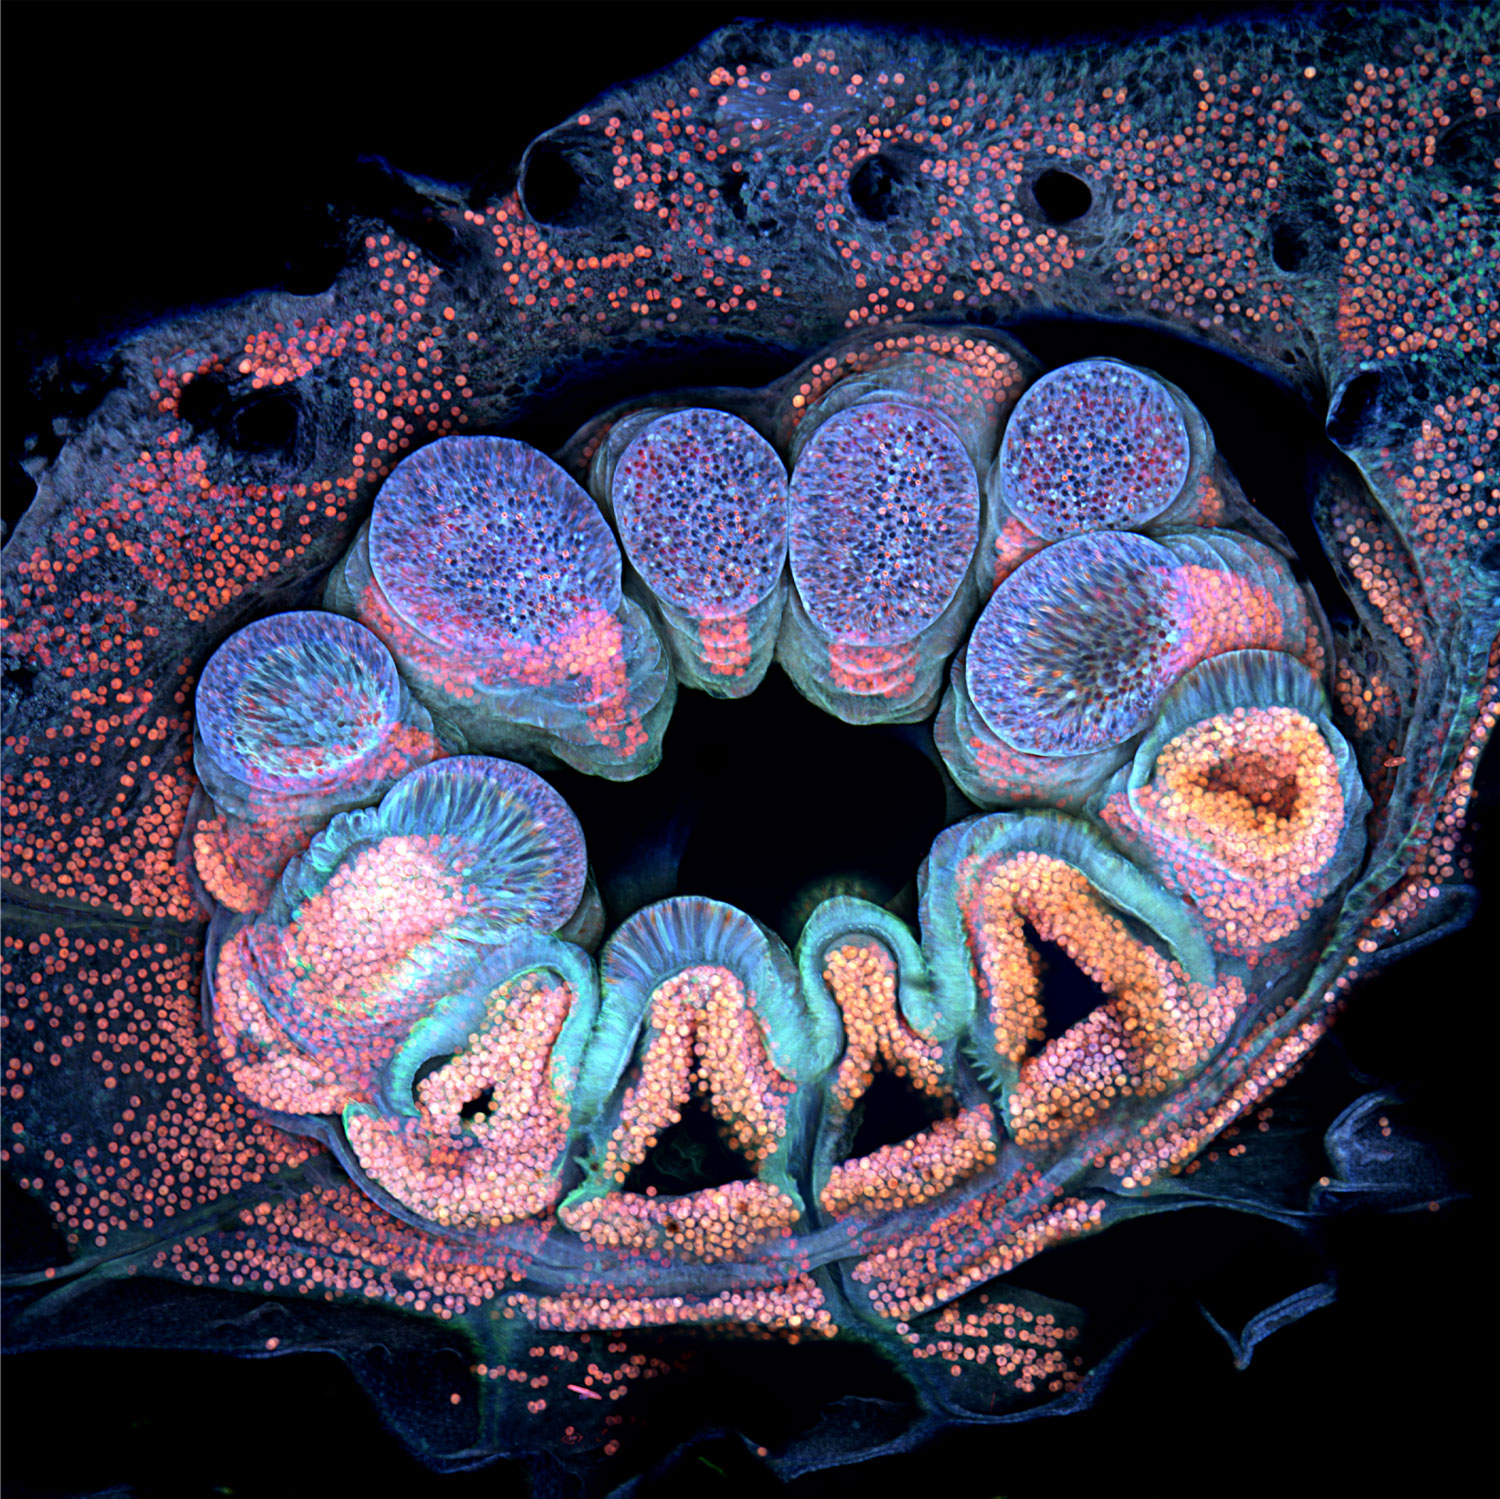 a coral polyp, shown fluorescent in blue, pink, and purple, resembling a ring of teeth or similar structures, against a black background